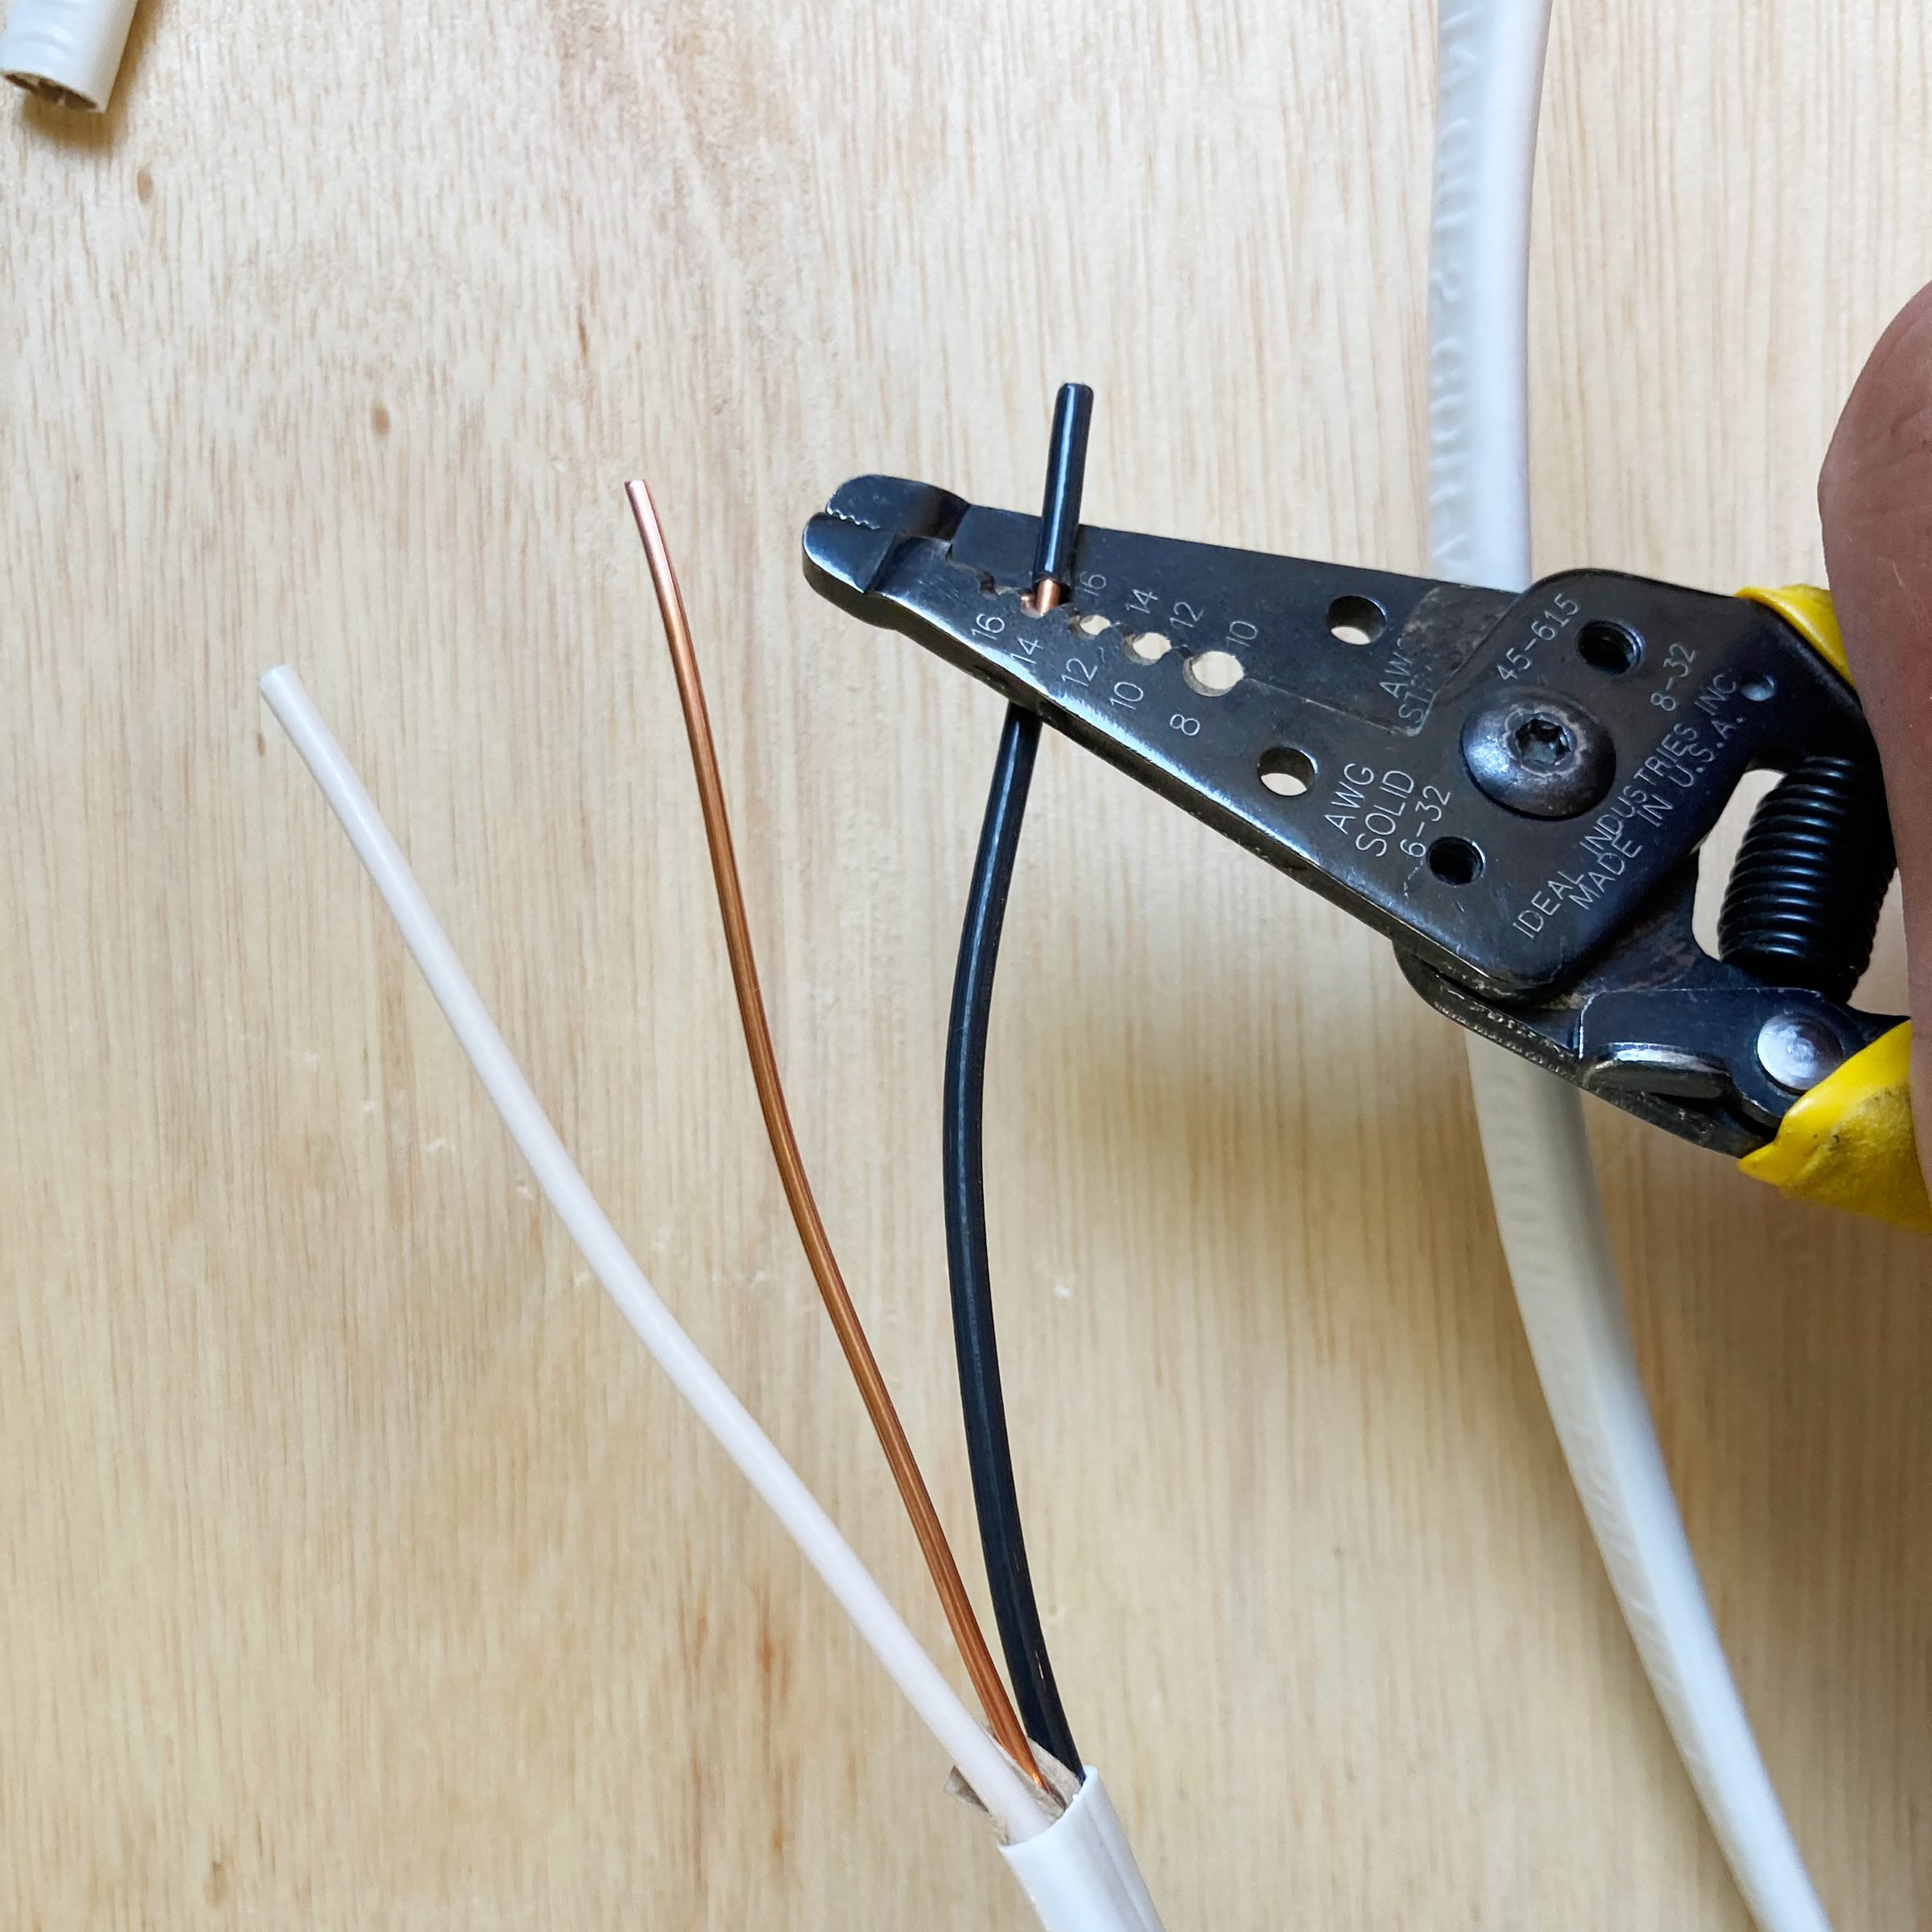 How to Splice Electrical Circuit Wires